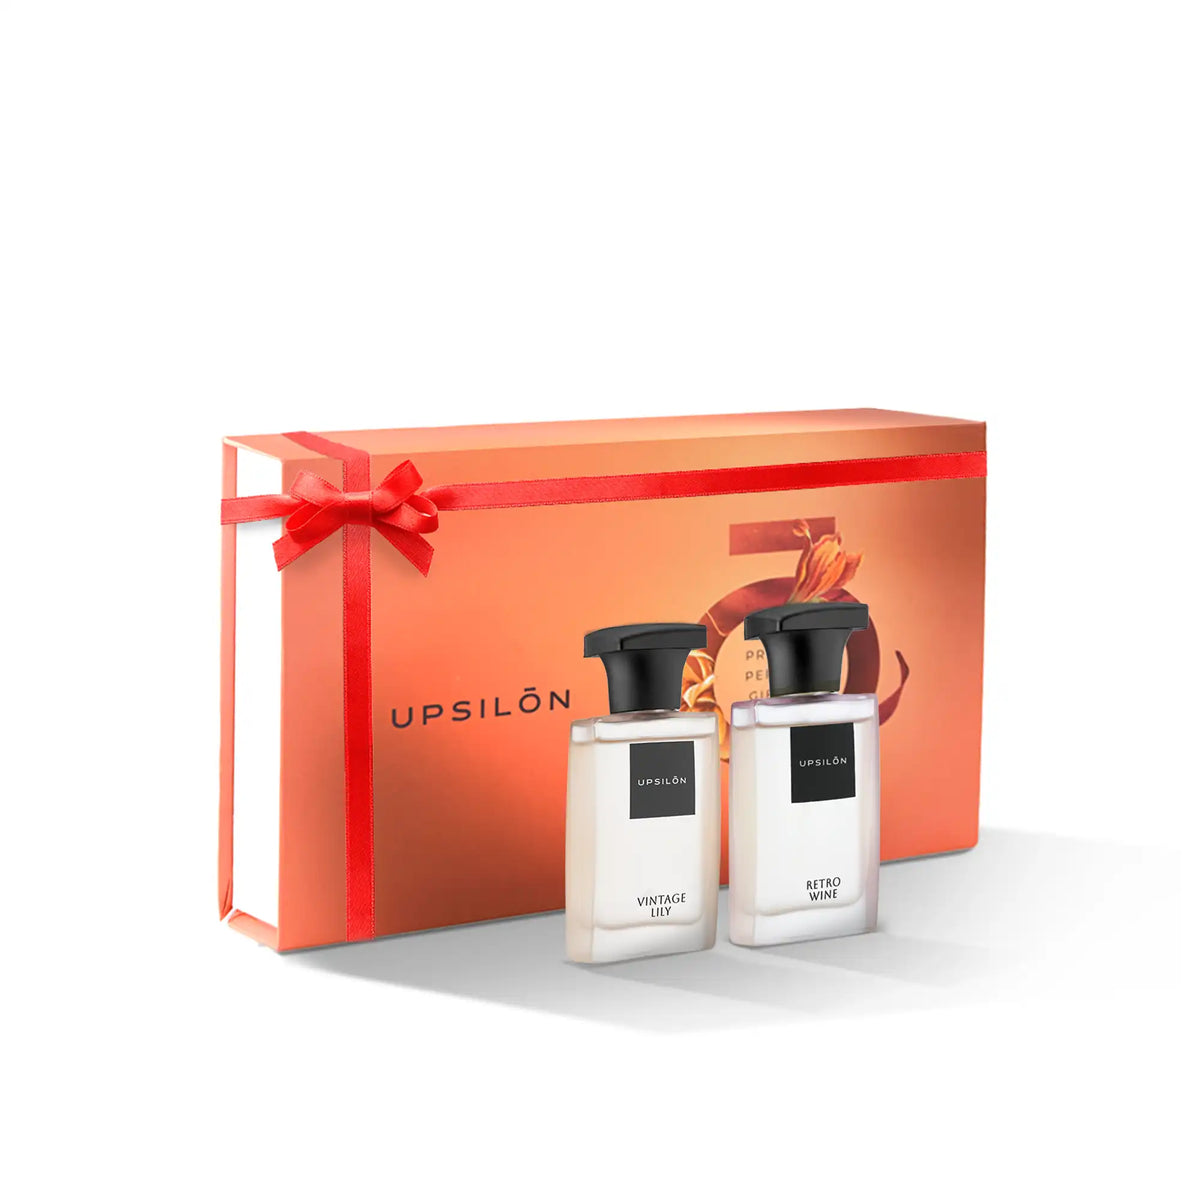 Double the fragrance delight: A beautifully wrapped gift box containing two Upsilon Eau de Parfum bottles, Vintage Lily for women and Retro Wine for men.